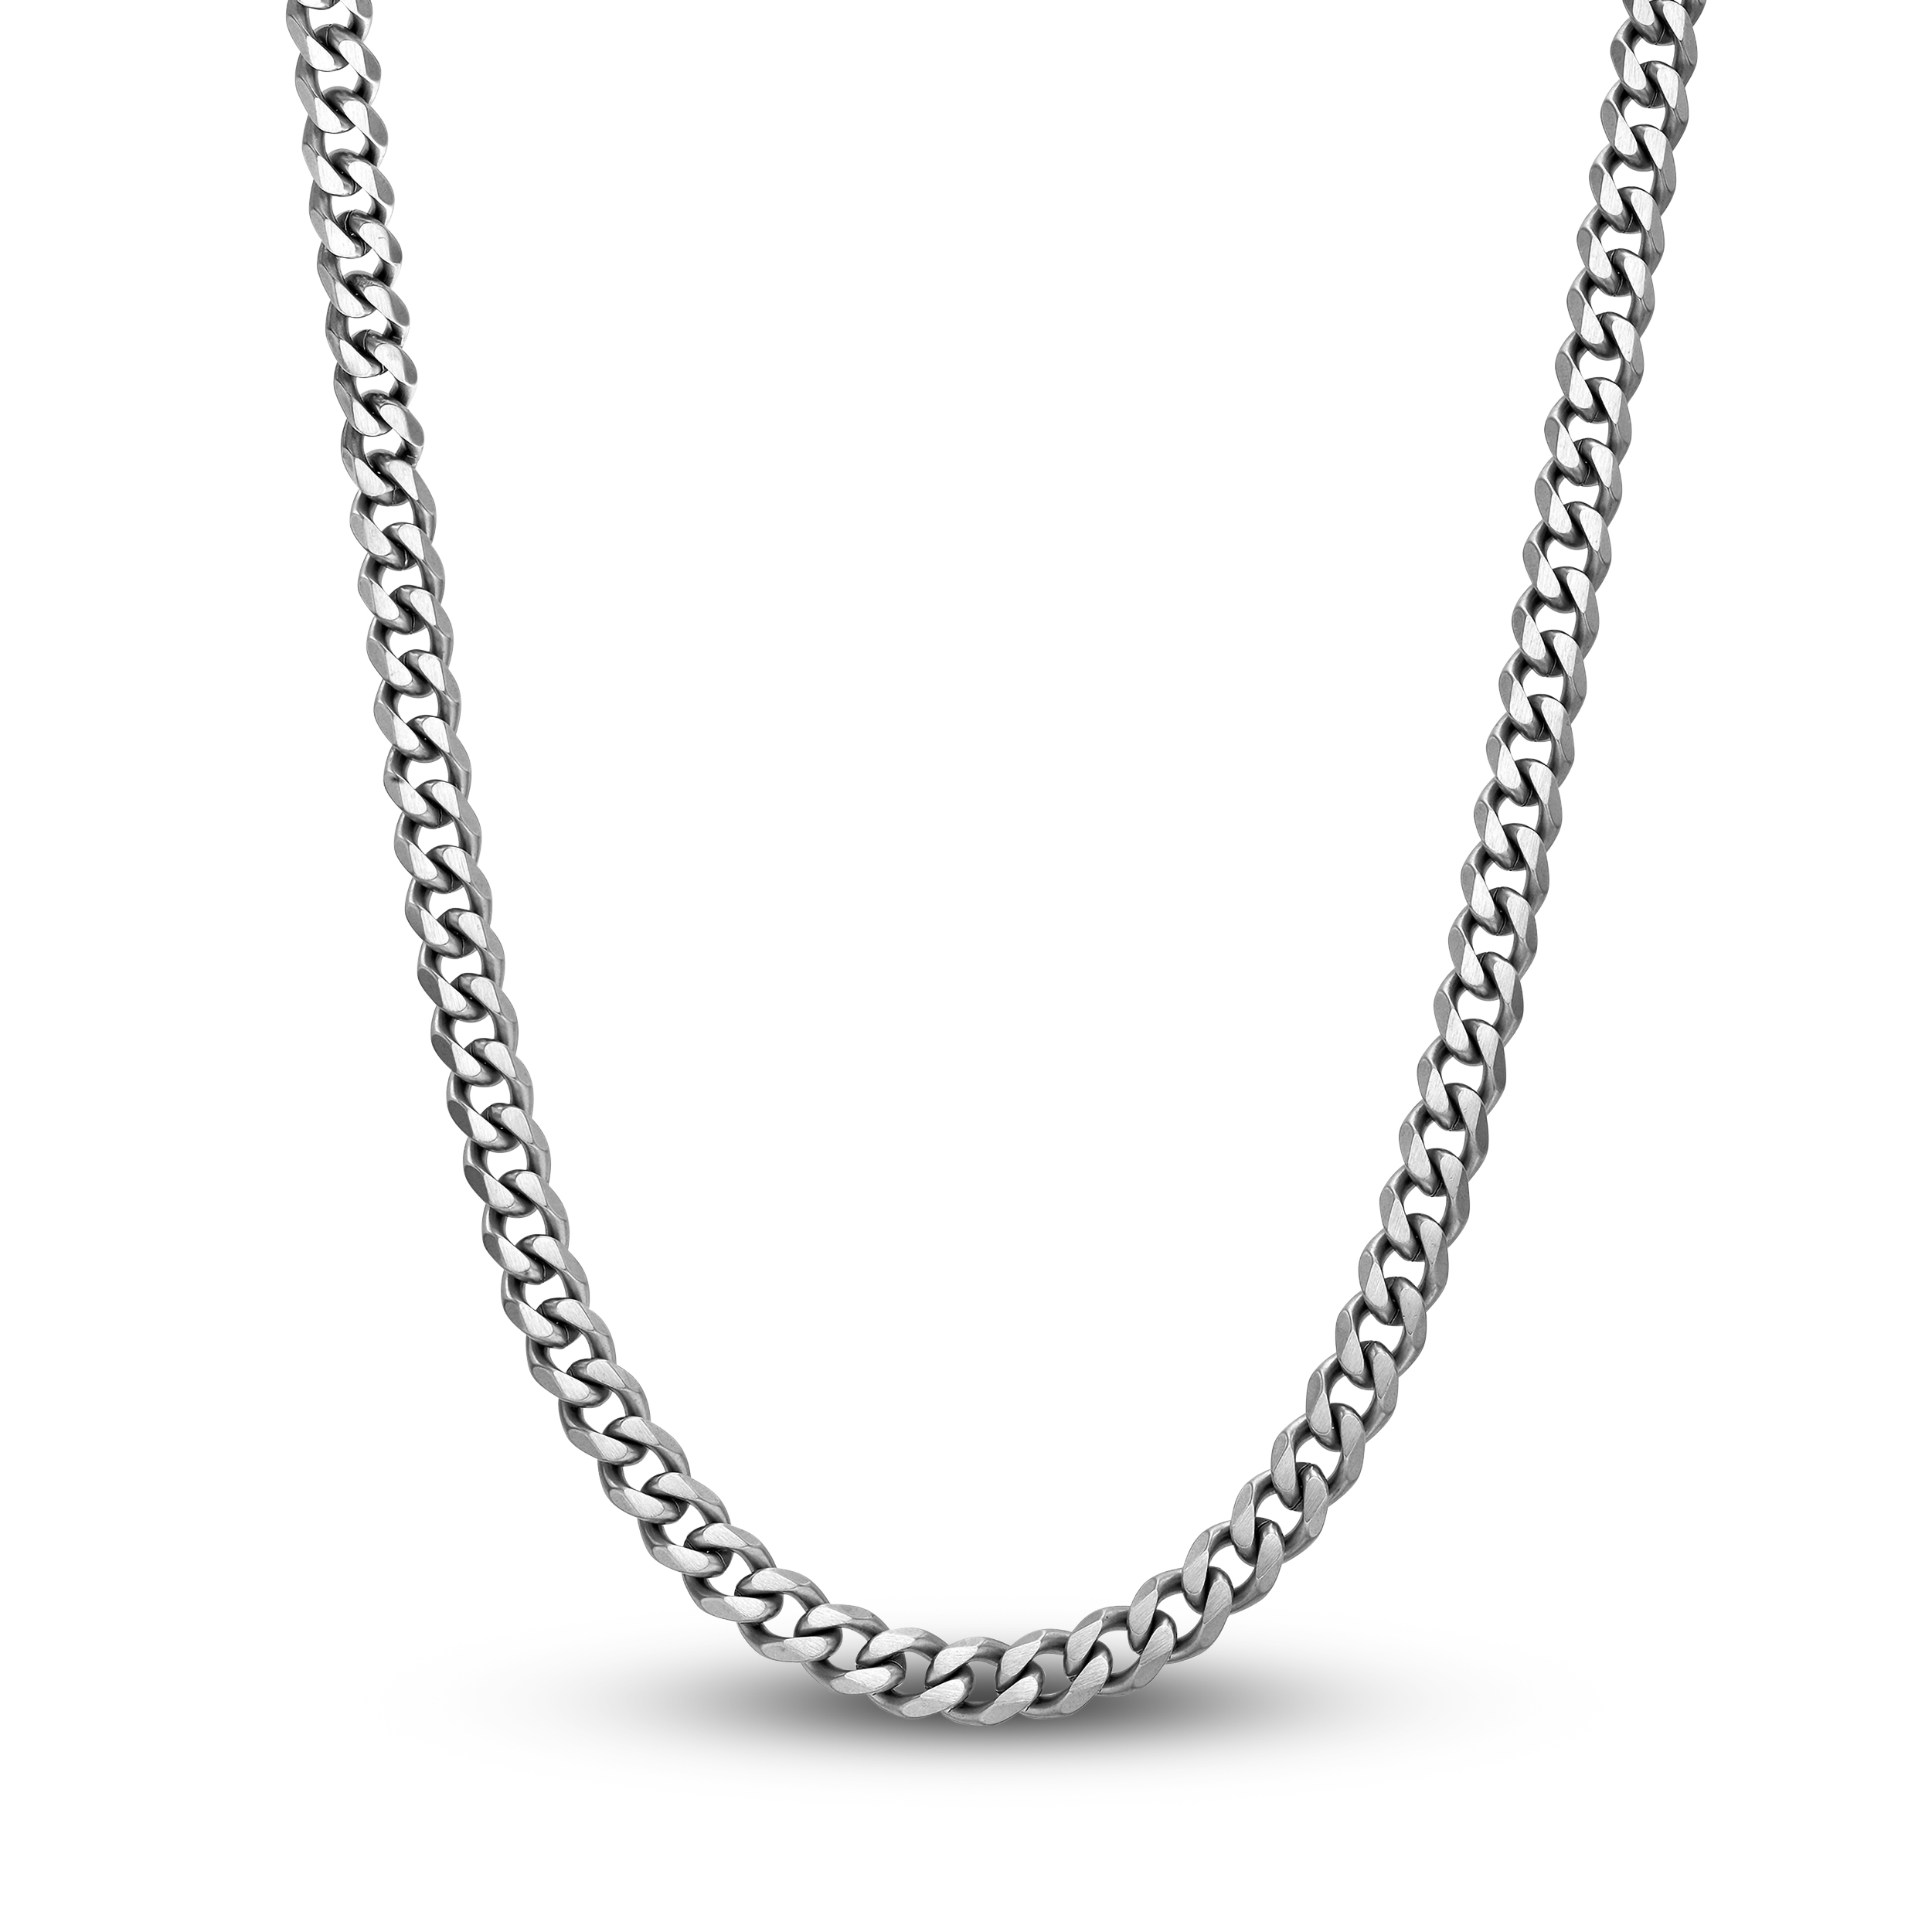 Men's Curb Chain Necklace Stainless Steel 8mm 24" a8EULlr5